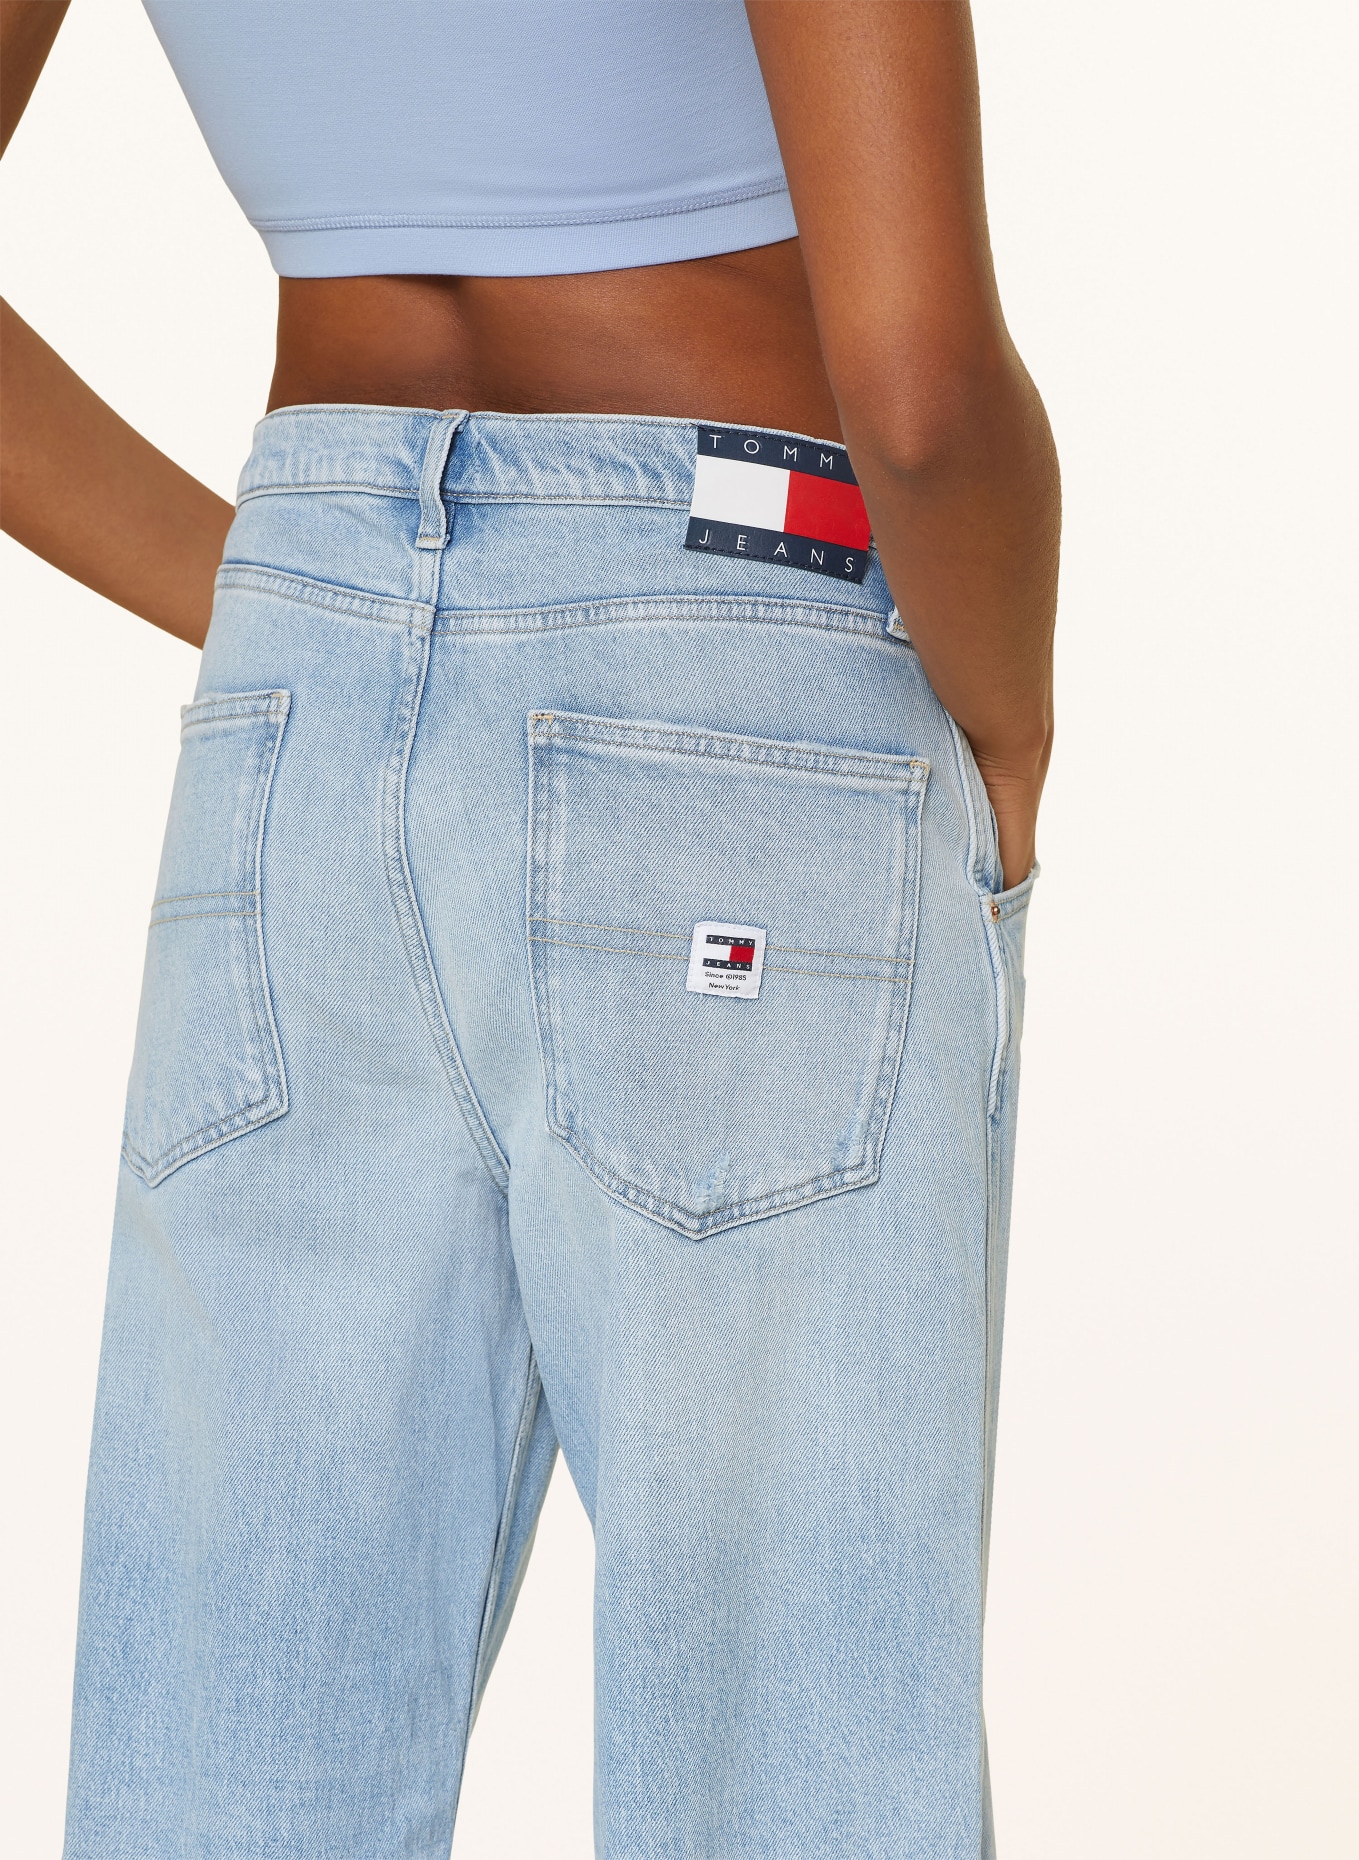 TOMMY JEANS Straight jeans DAISY, Color: 1AB Denim Light (Image 5)